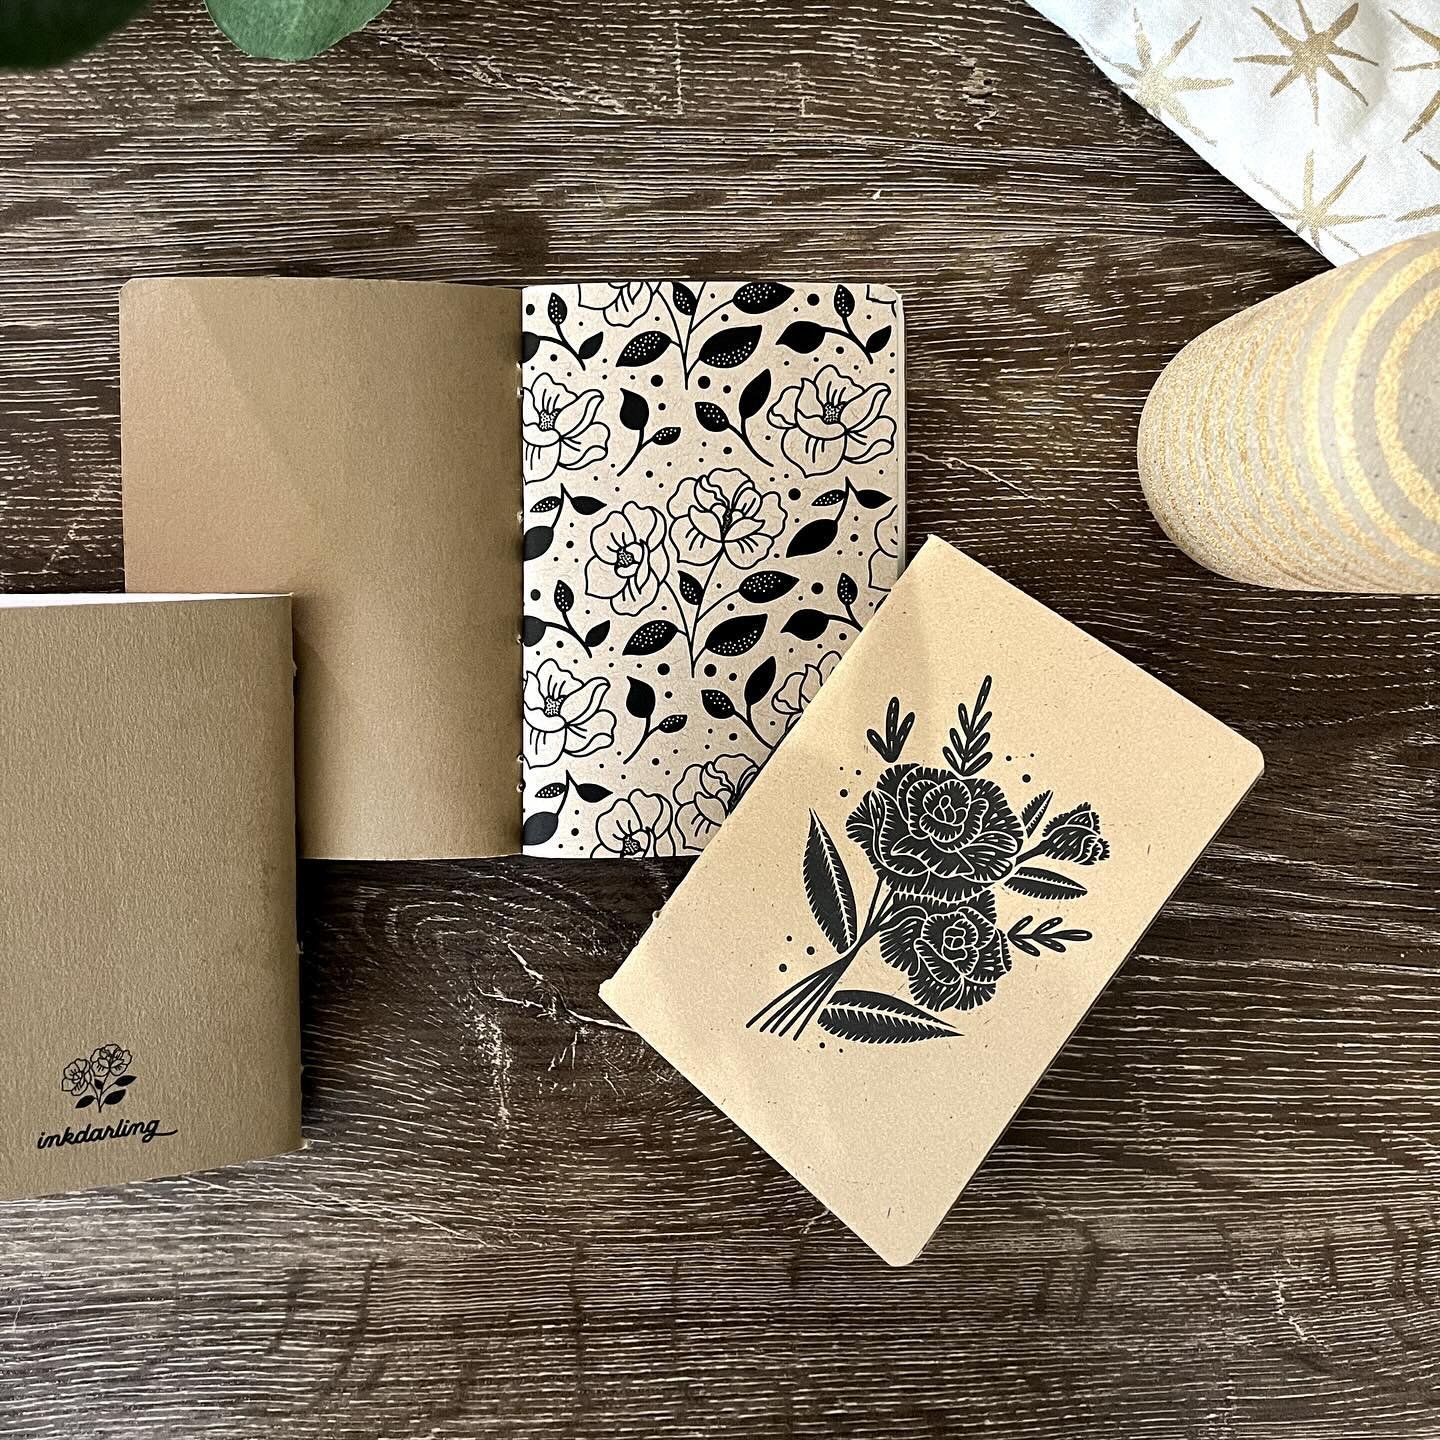 Behold, the perfect companions for your creative journey! 🎨✨ Now on sale! These limited edition sketchbooks are lovingly crafted to inspire your artistic expressions wherever you go. Elevate your doodles and sketches with these pocket-sized treasure